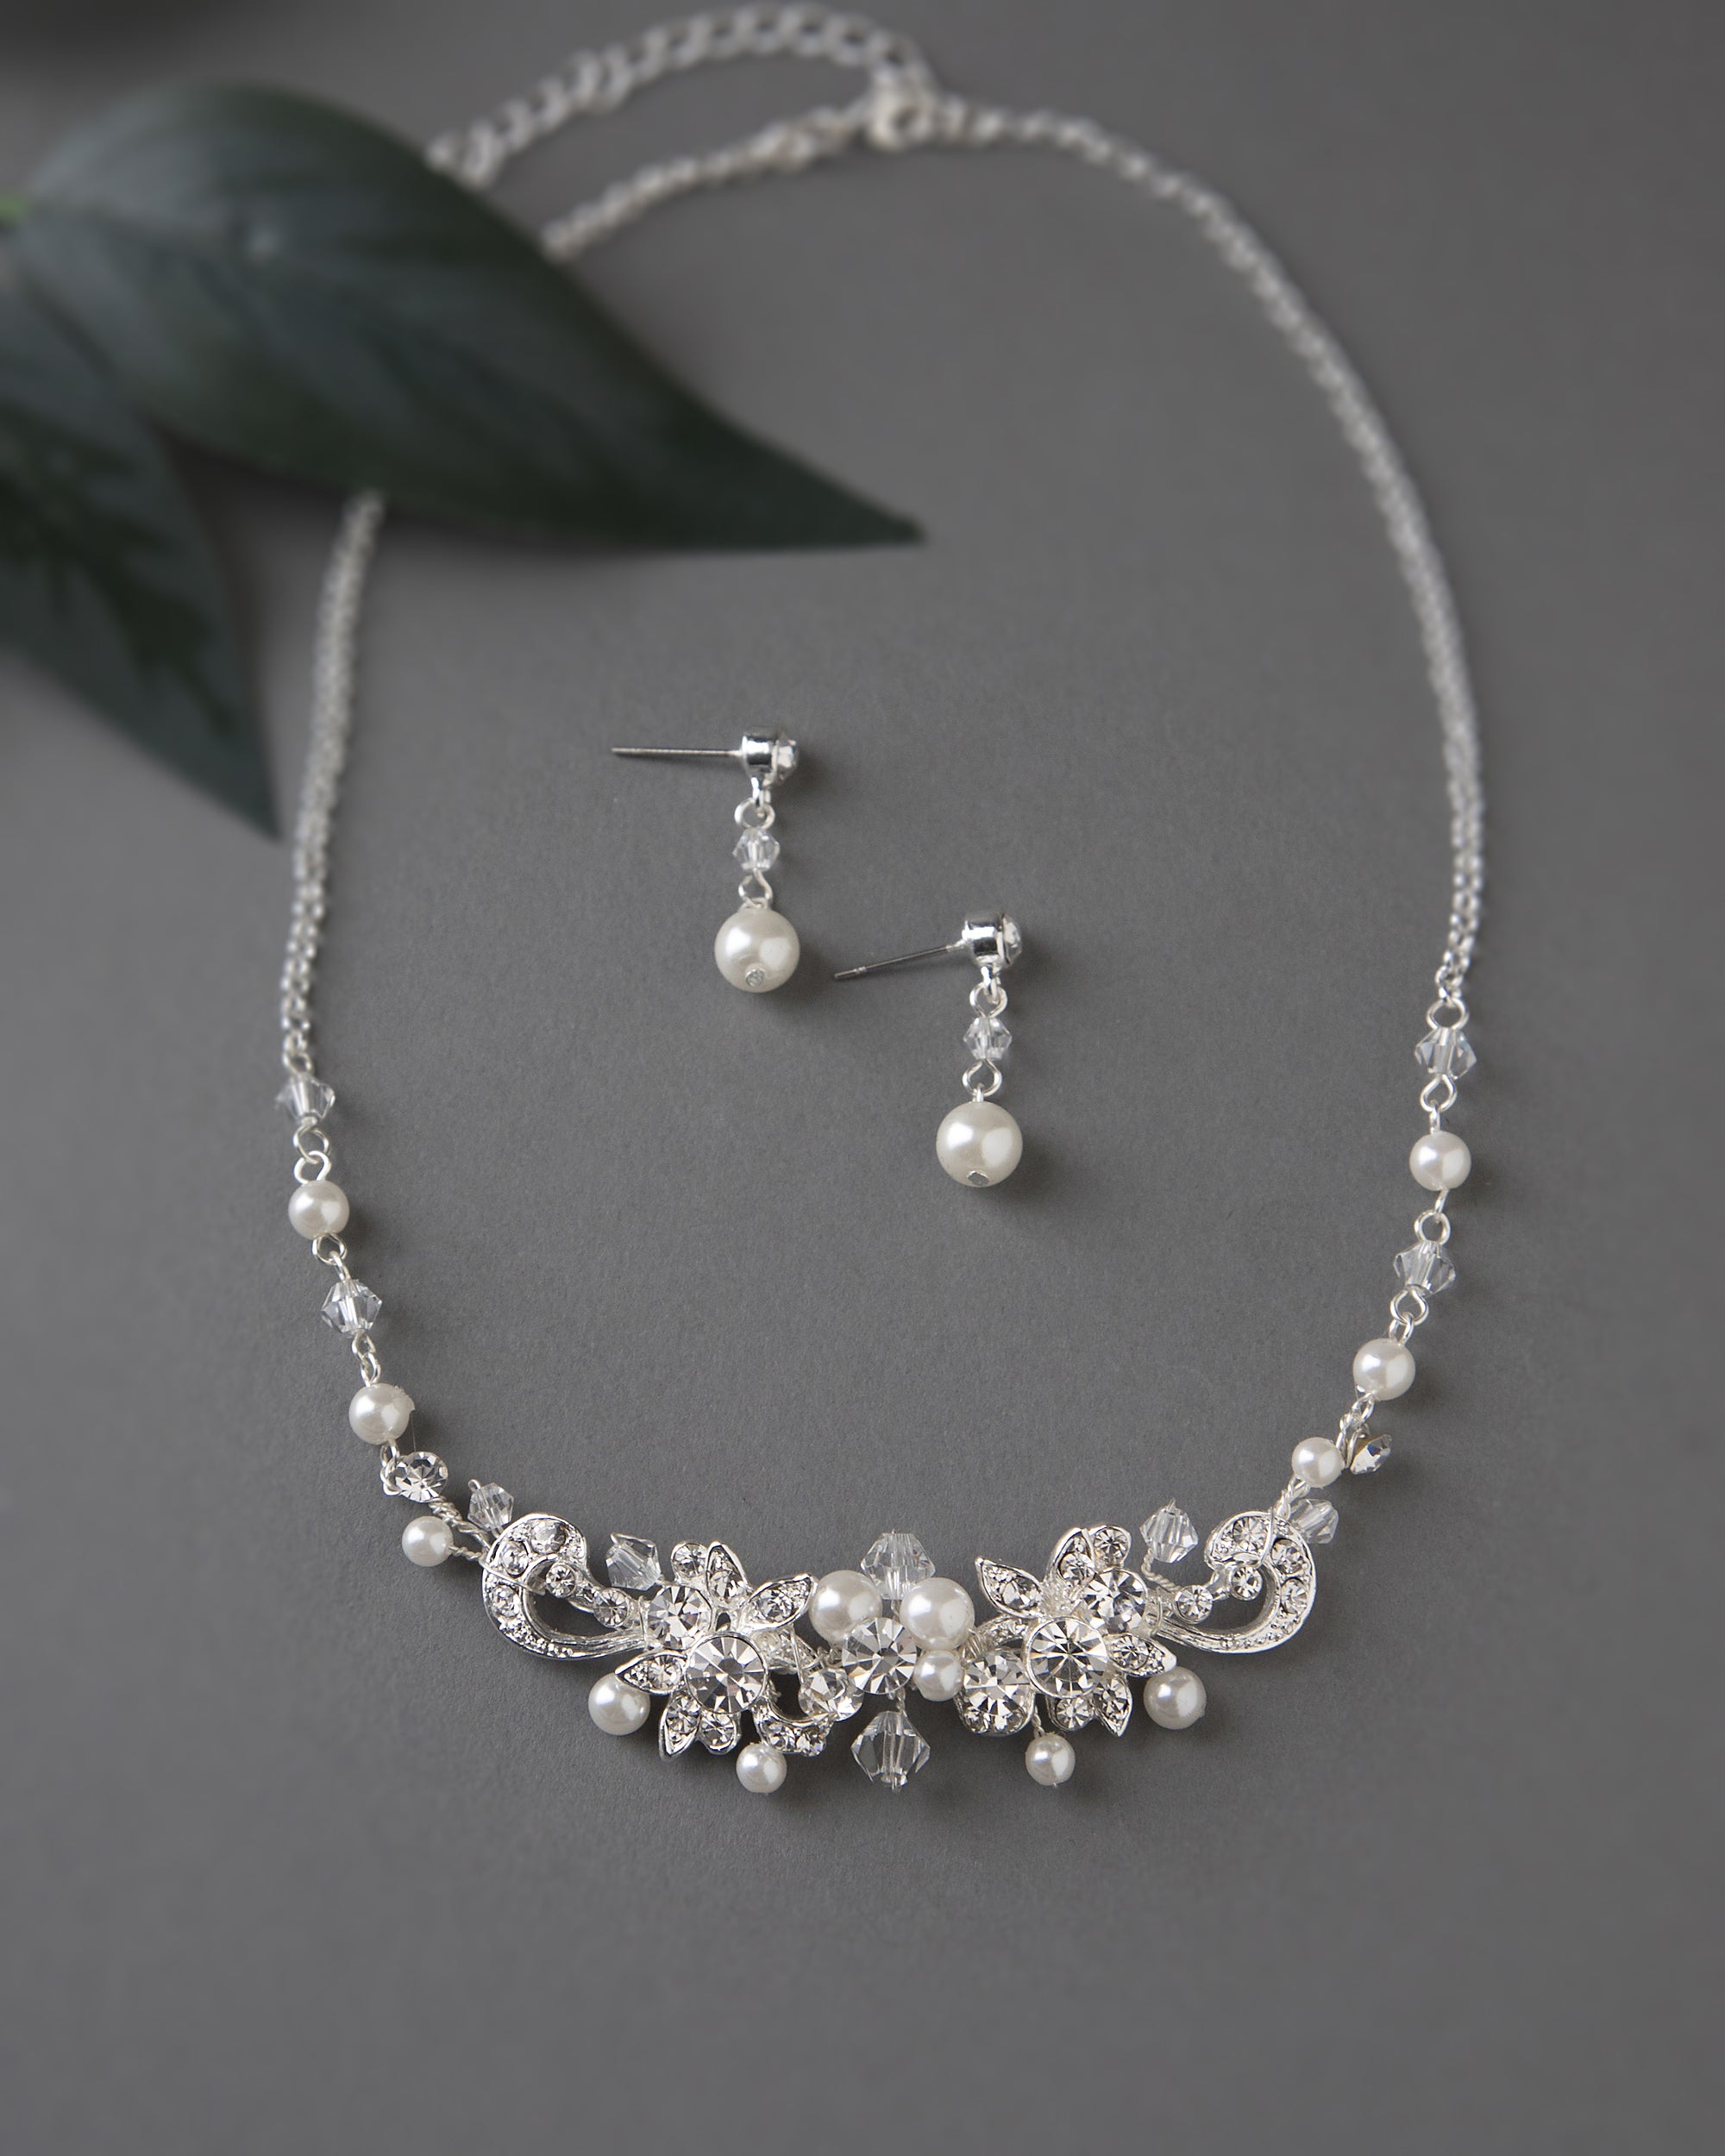 Bridal Necklace Set Of Floral Crystals and Ivory Pearls - Cassandra Lynne